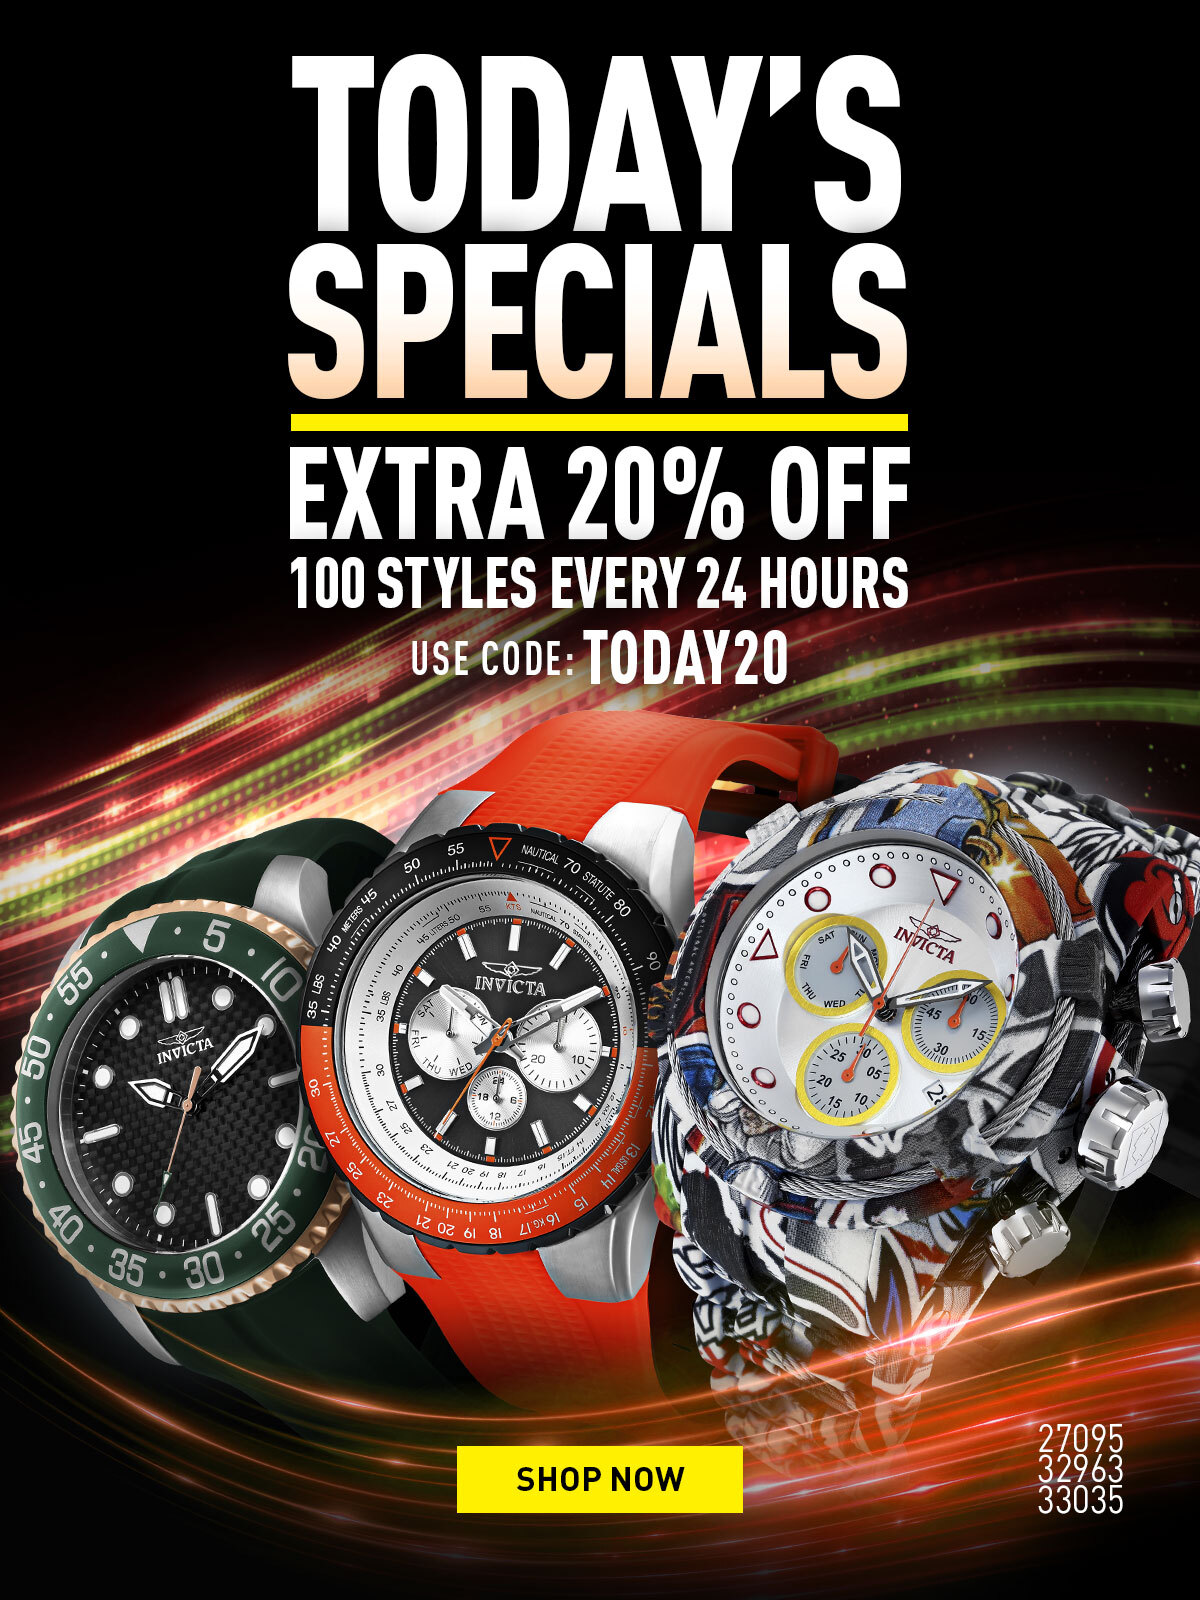 Today's specials. Extra 20% off 100 styles every 24 hrs. Use code: Today20